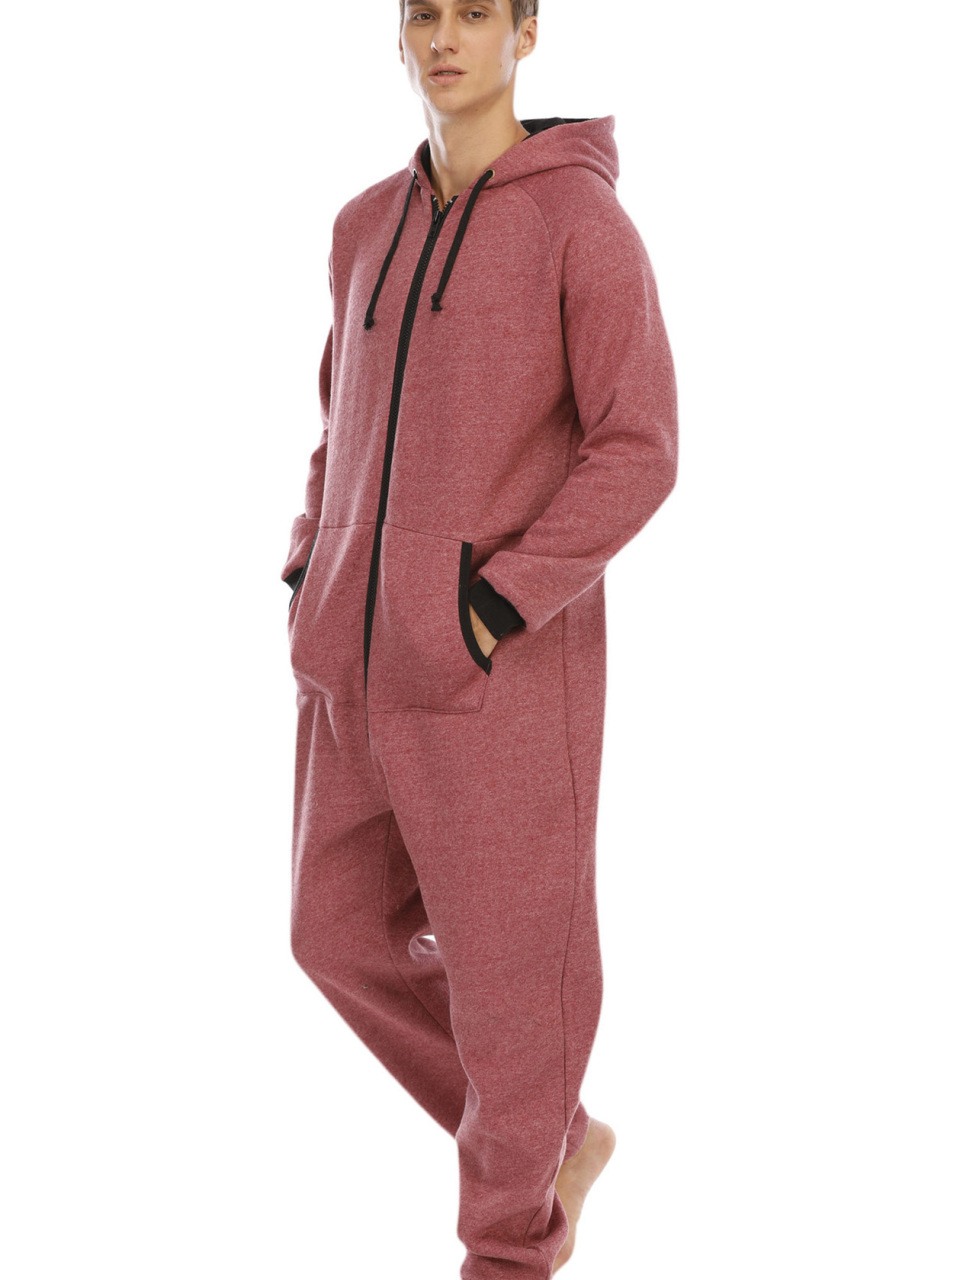 Men's Thickened Sweater Fleece Jumpsuit Pajamas Homewear Casual Suits